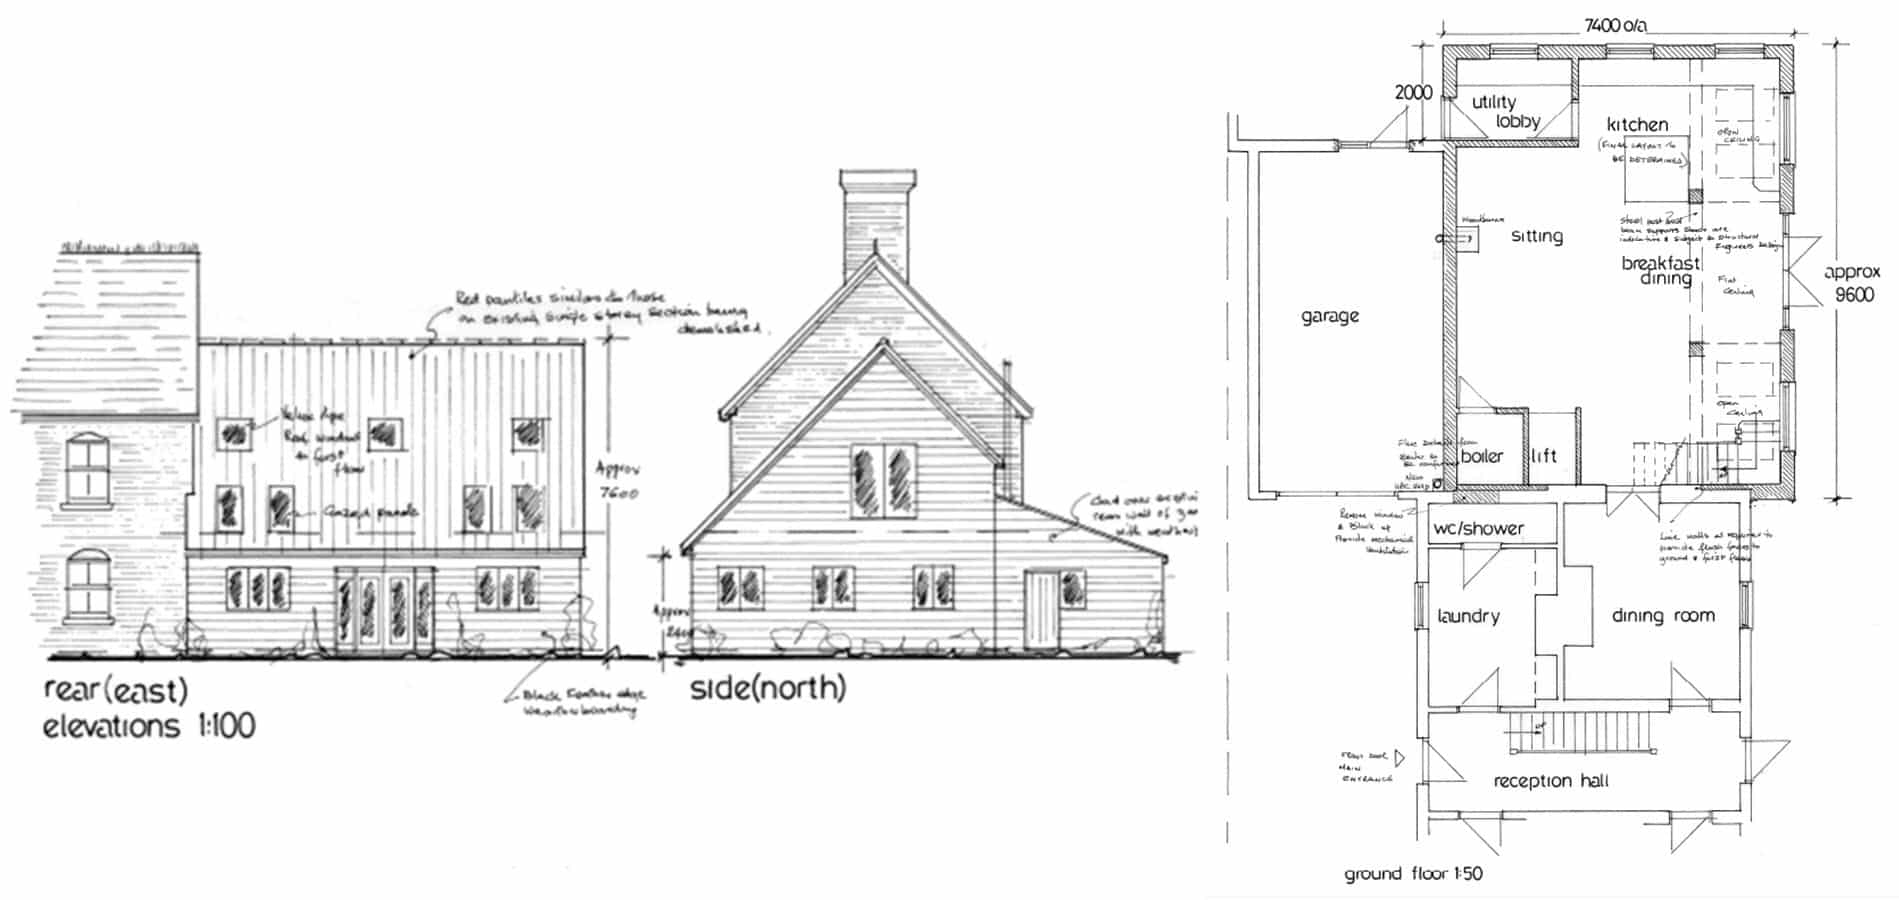 building design and planning pre building in Suffolk